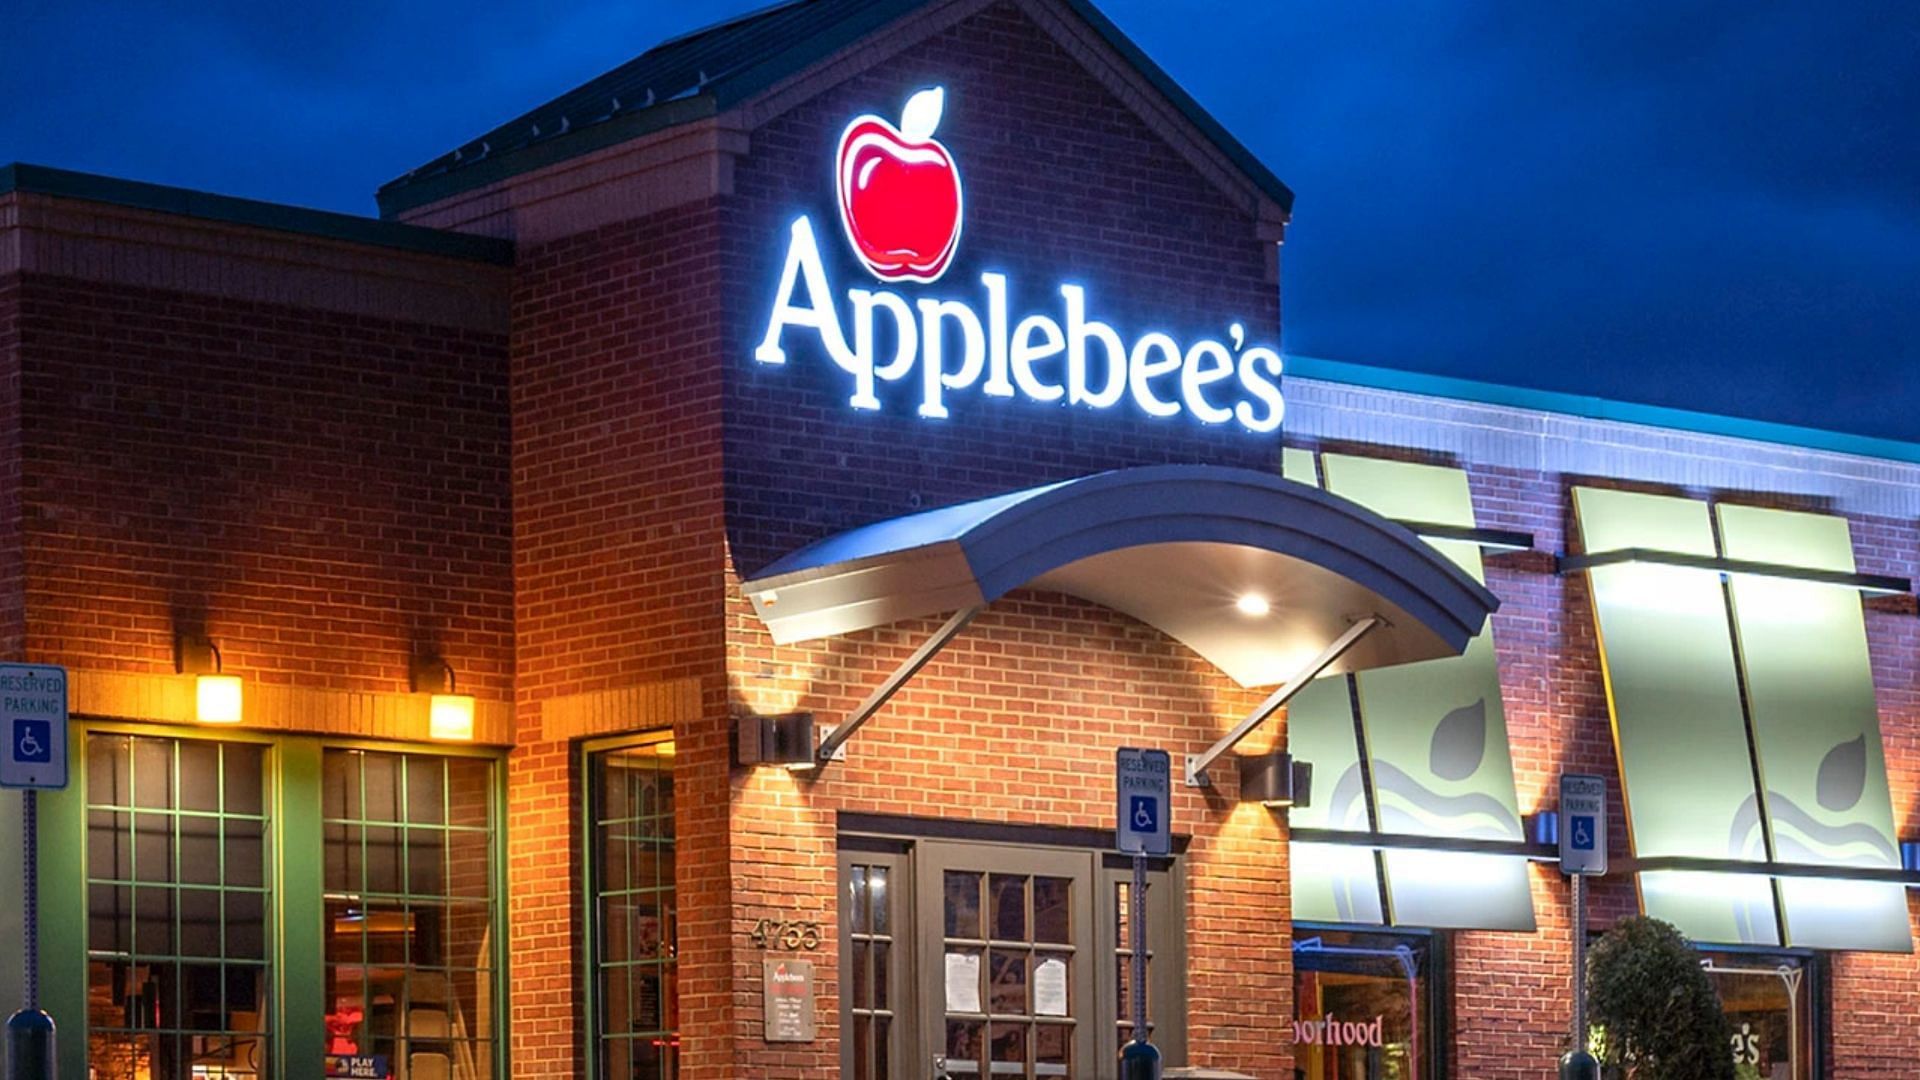 Applebee&rsquo;s brings back the All You Can Eat favorites to its menu for a limited time (Image via M. Suhail/Getty Images)